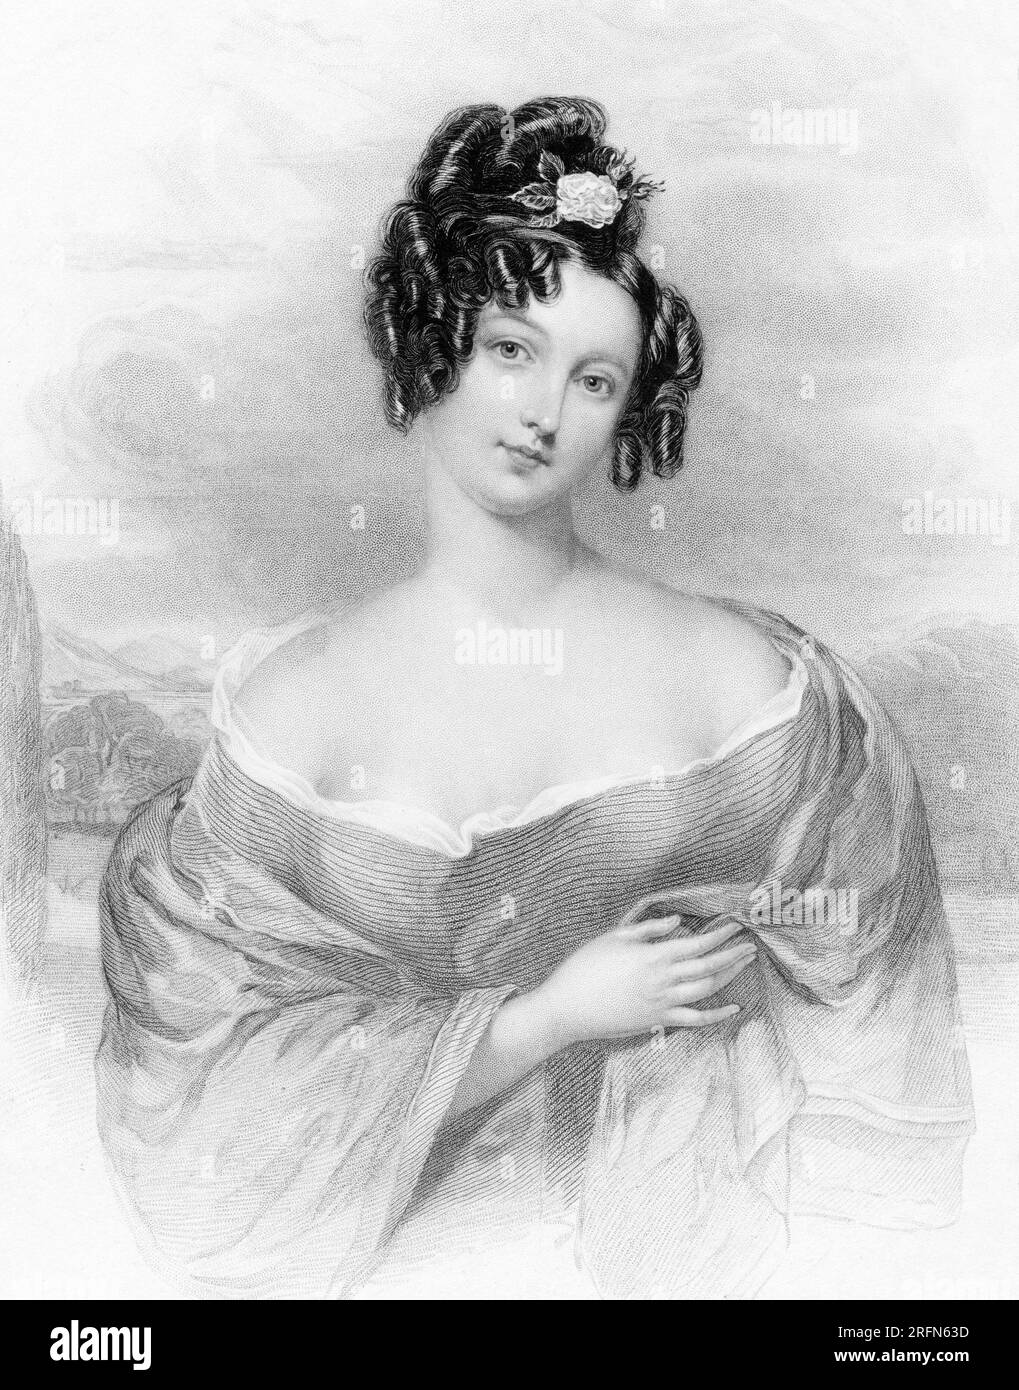 Josephine Bonaparte (1763-1814) or Josephine de Beauharnais was Empress of the French as the first wife of Emperor Napoleon I from 18 May 1804 until their marriage was annulled on 10 January 1810. Illustration Henry Thomas Ryall after J. Holmes. Stock Photo